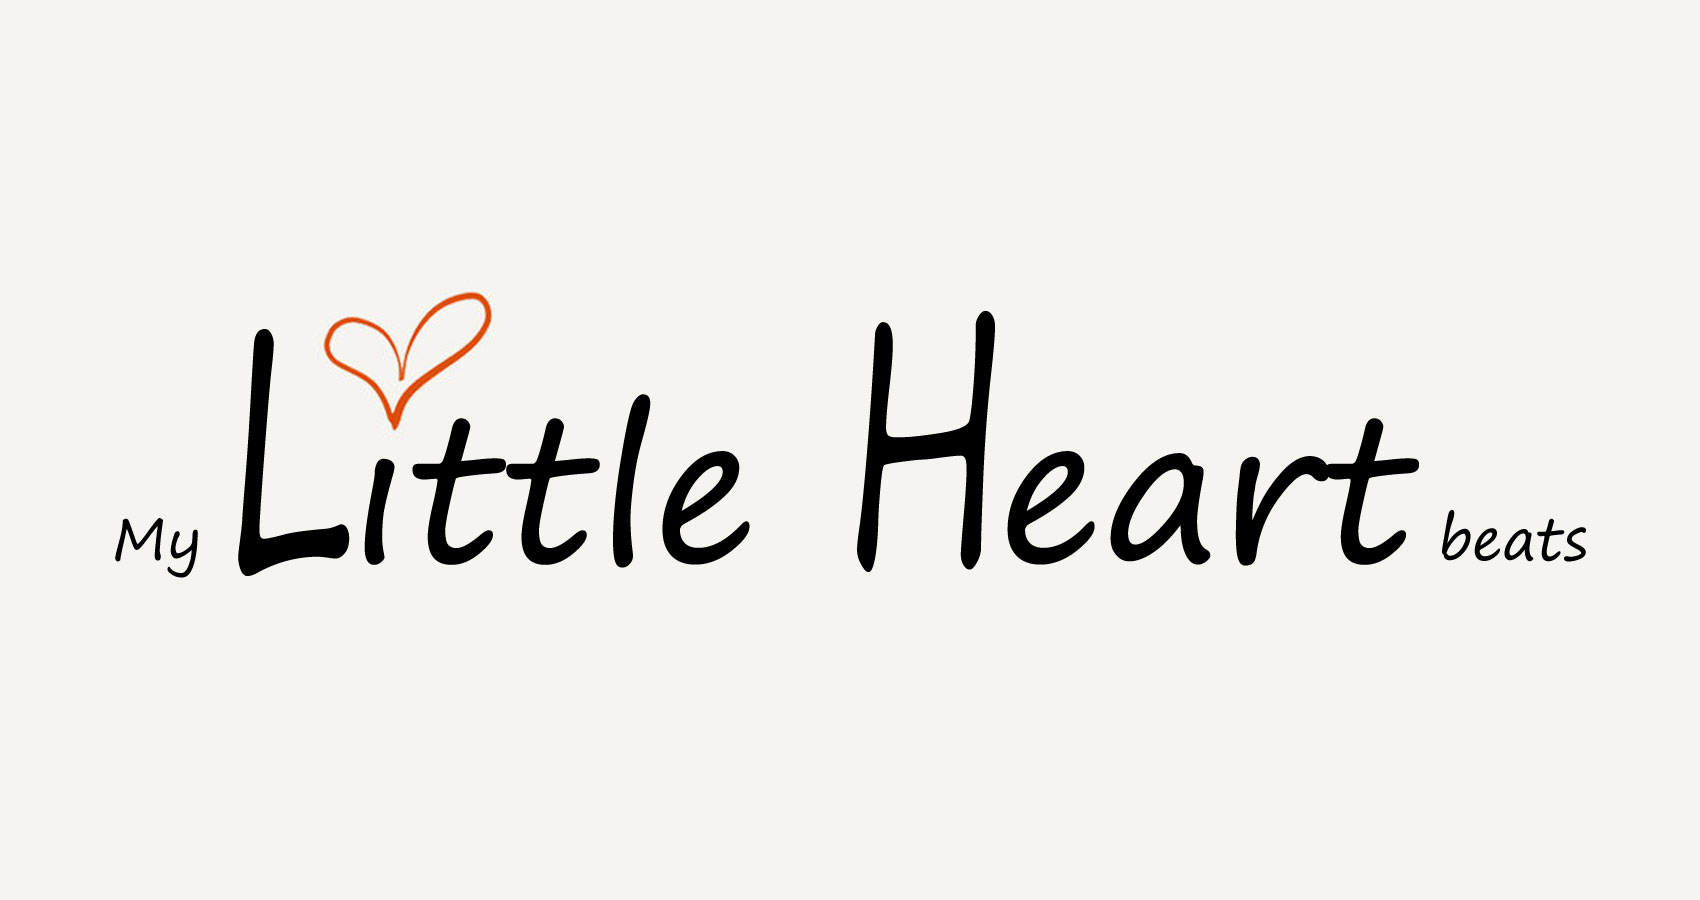 My little heart beats by Charlie Bottle at Spillwords.com